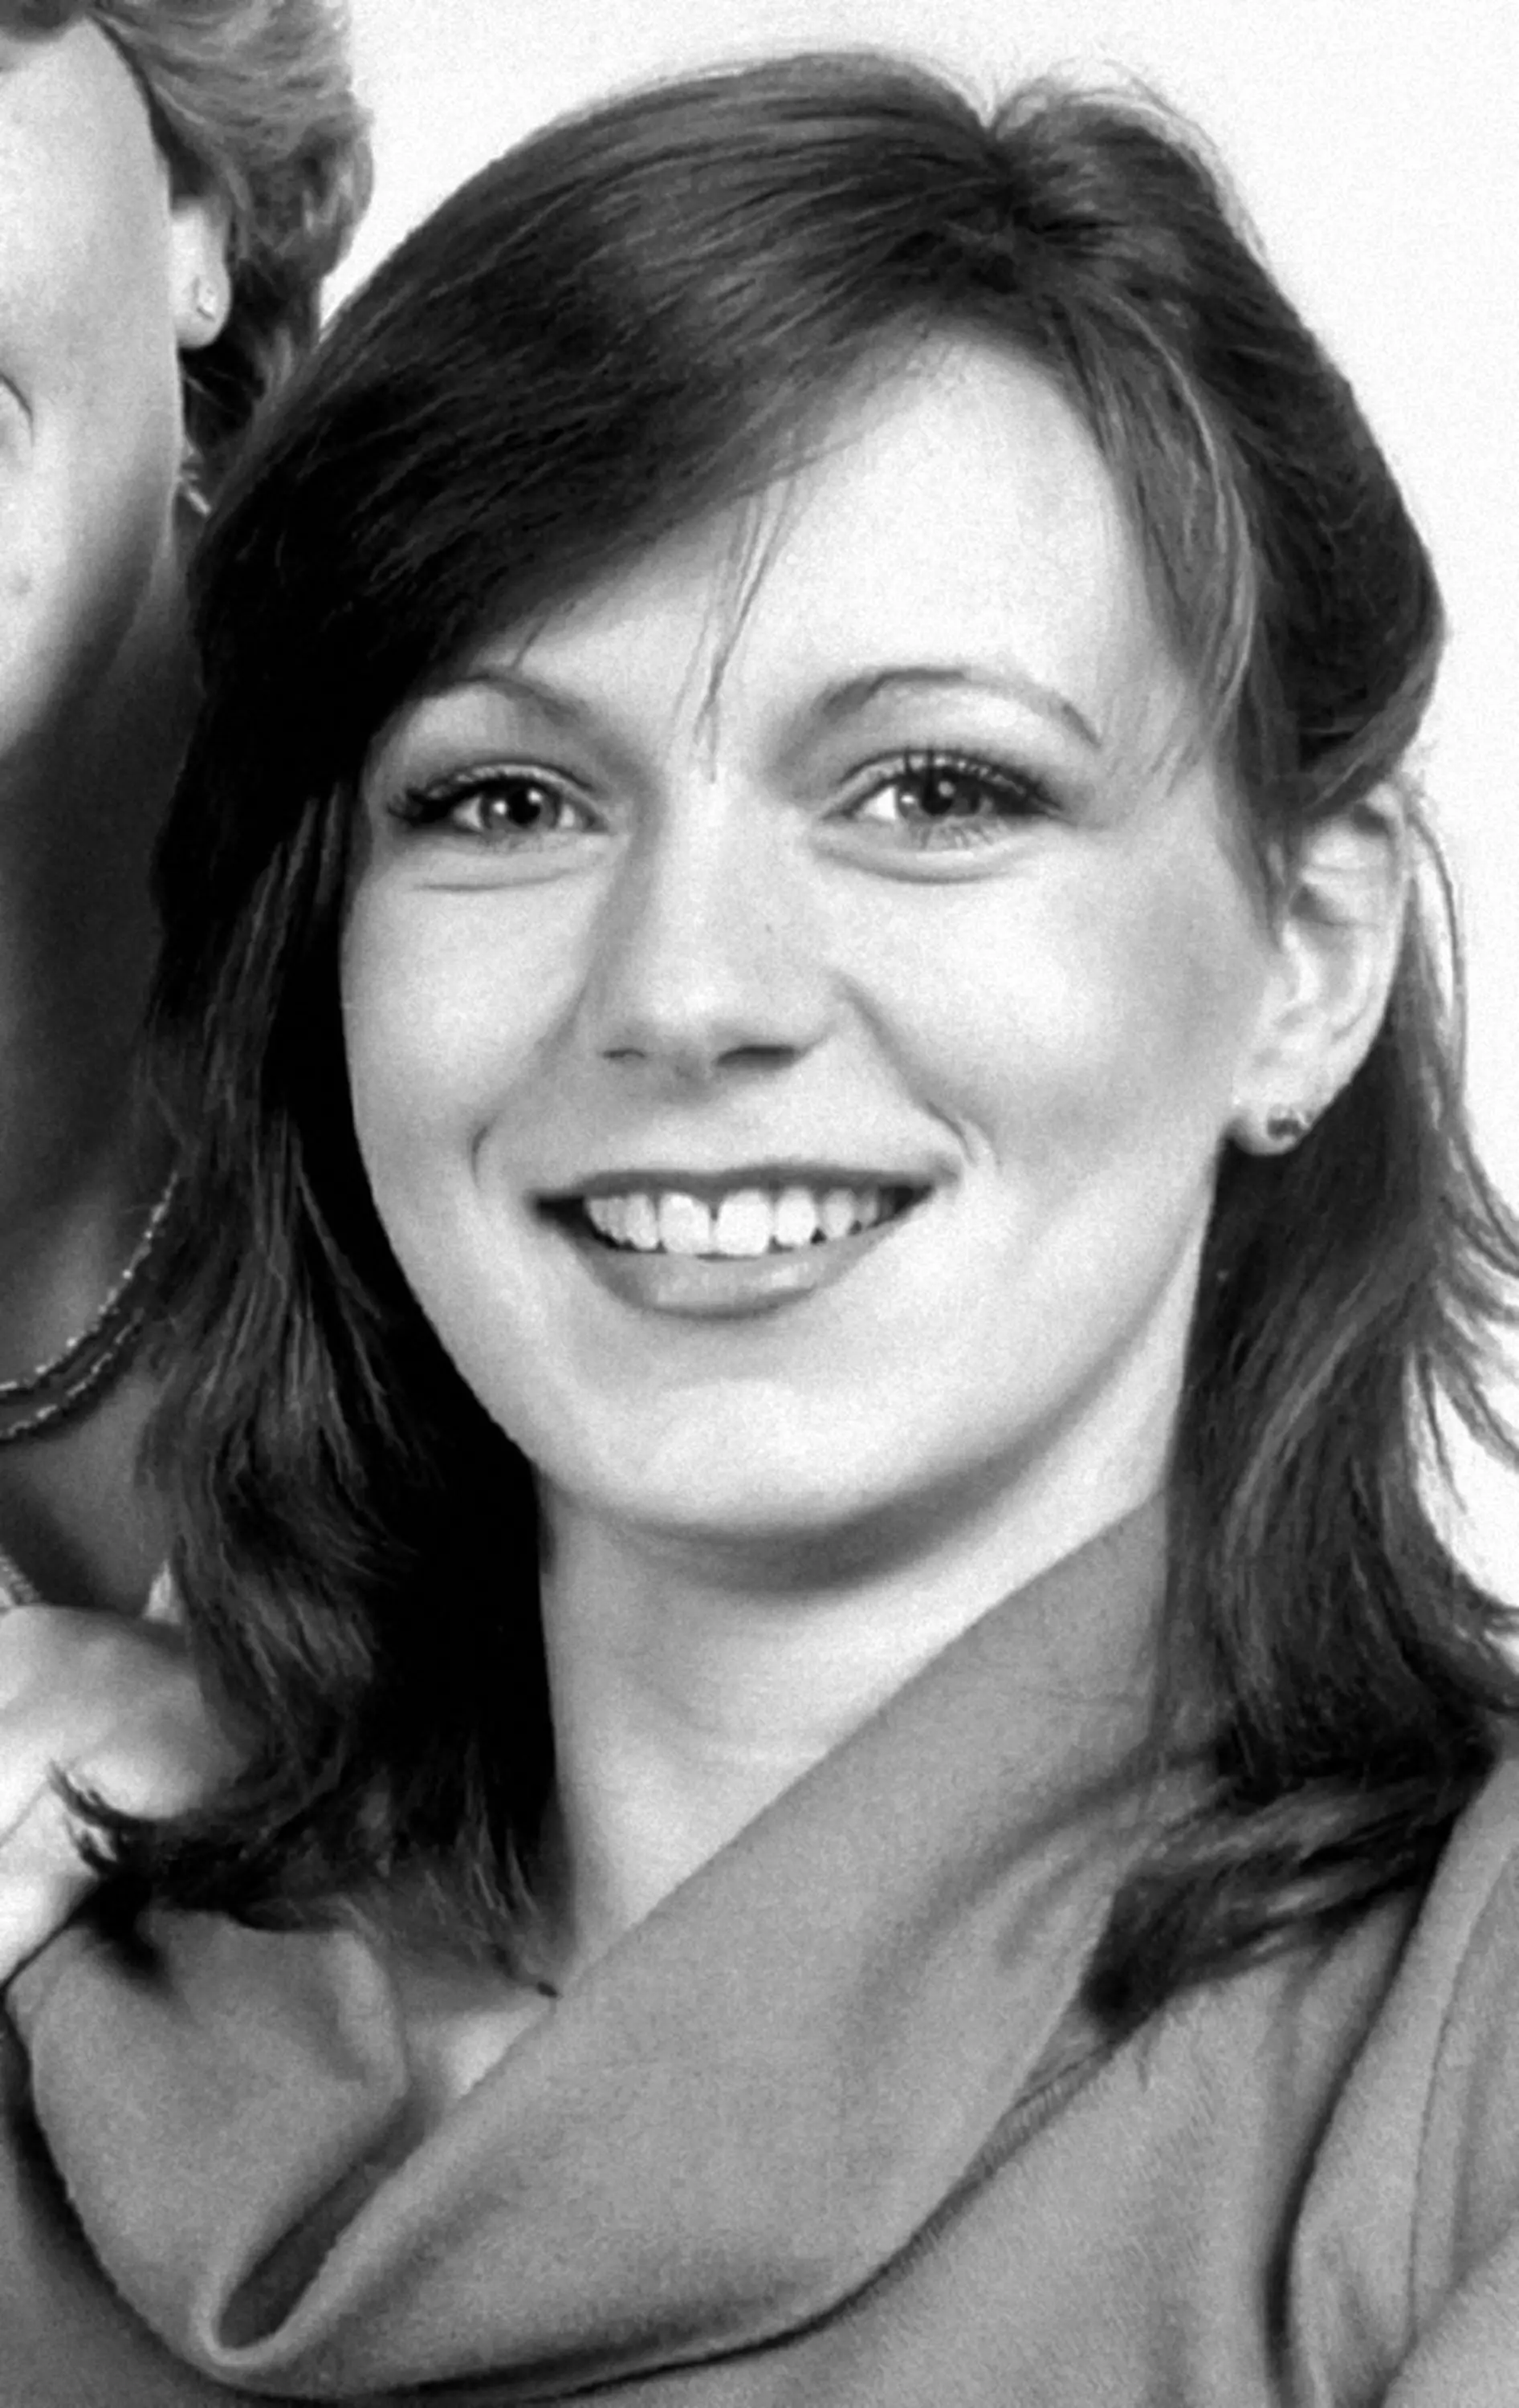 The disappearance of Suzy Lamplugh remains unsolved.